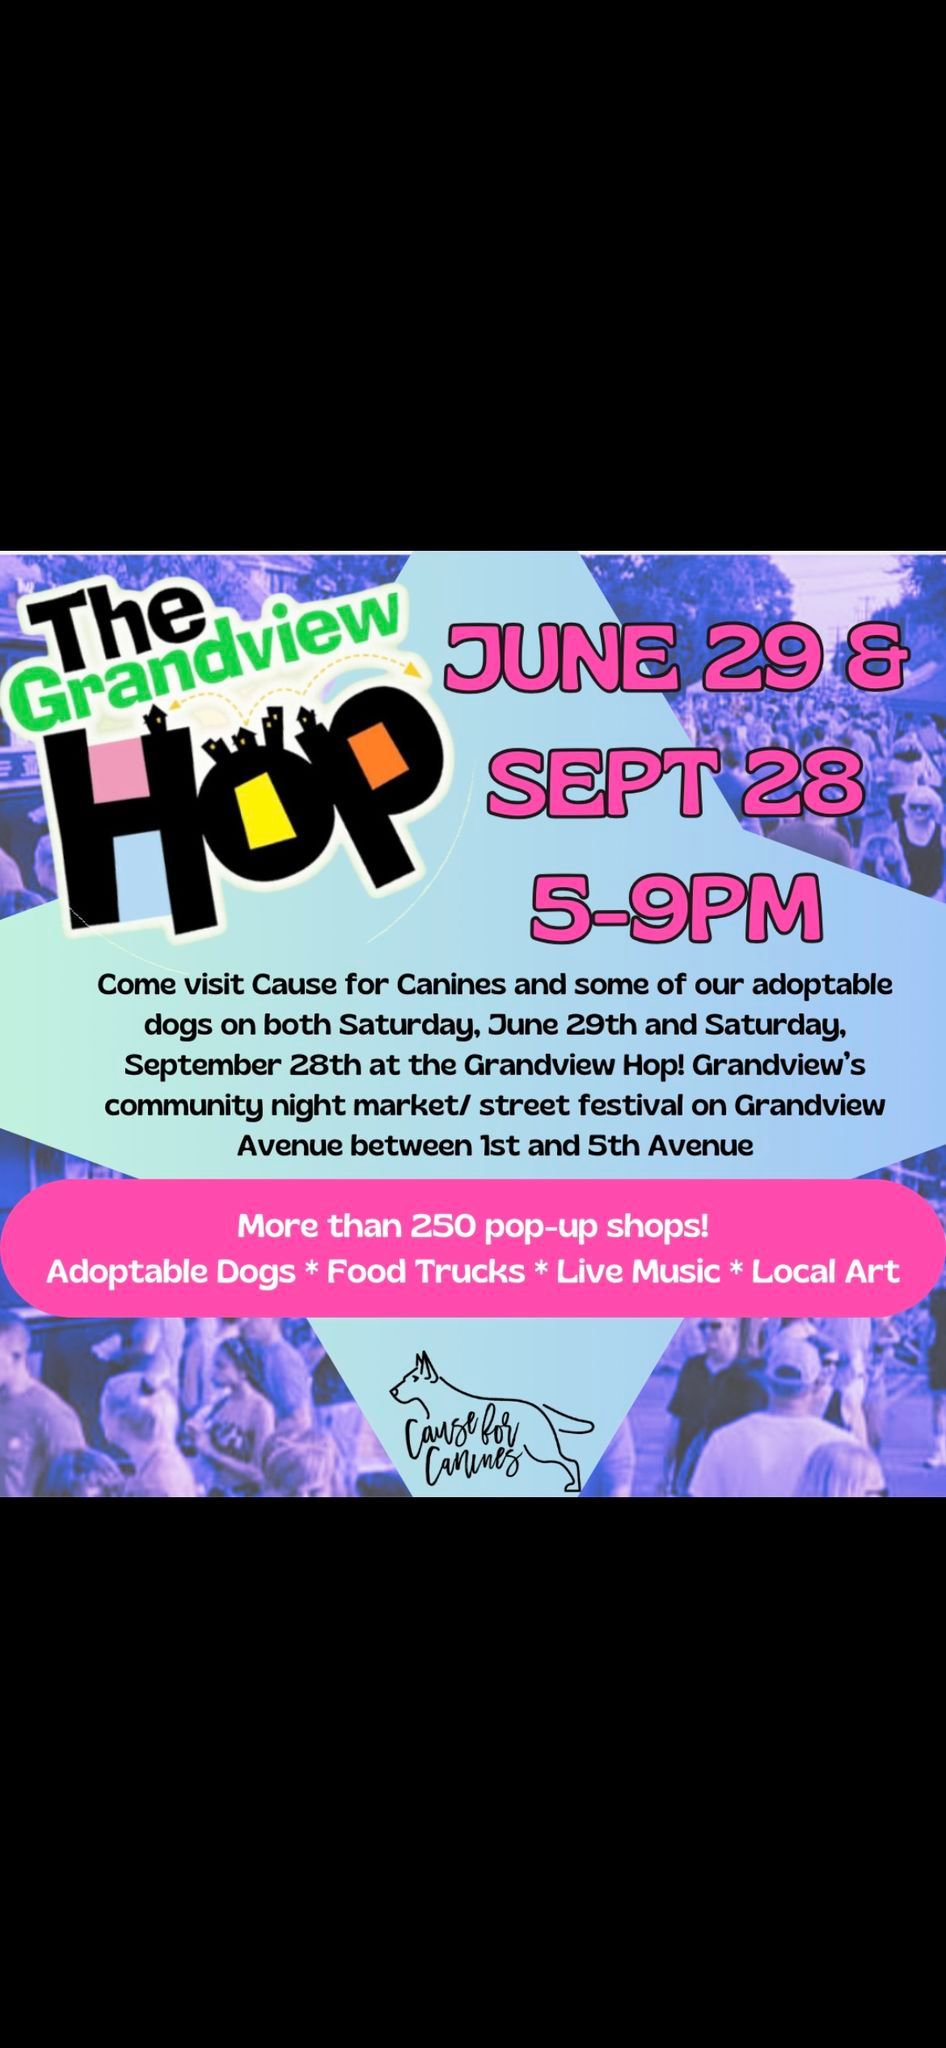 The Grandview Hop & Cause for Canines